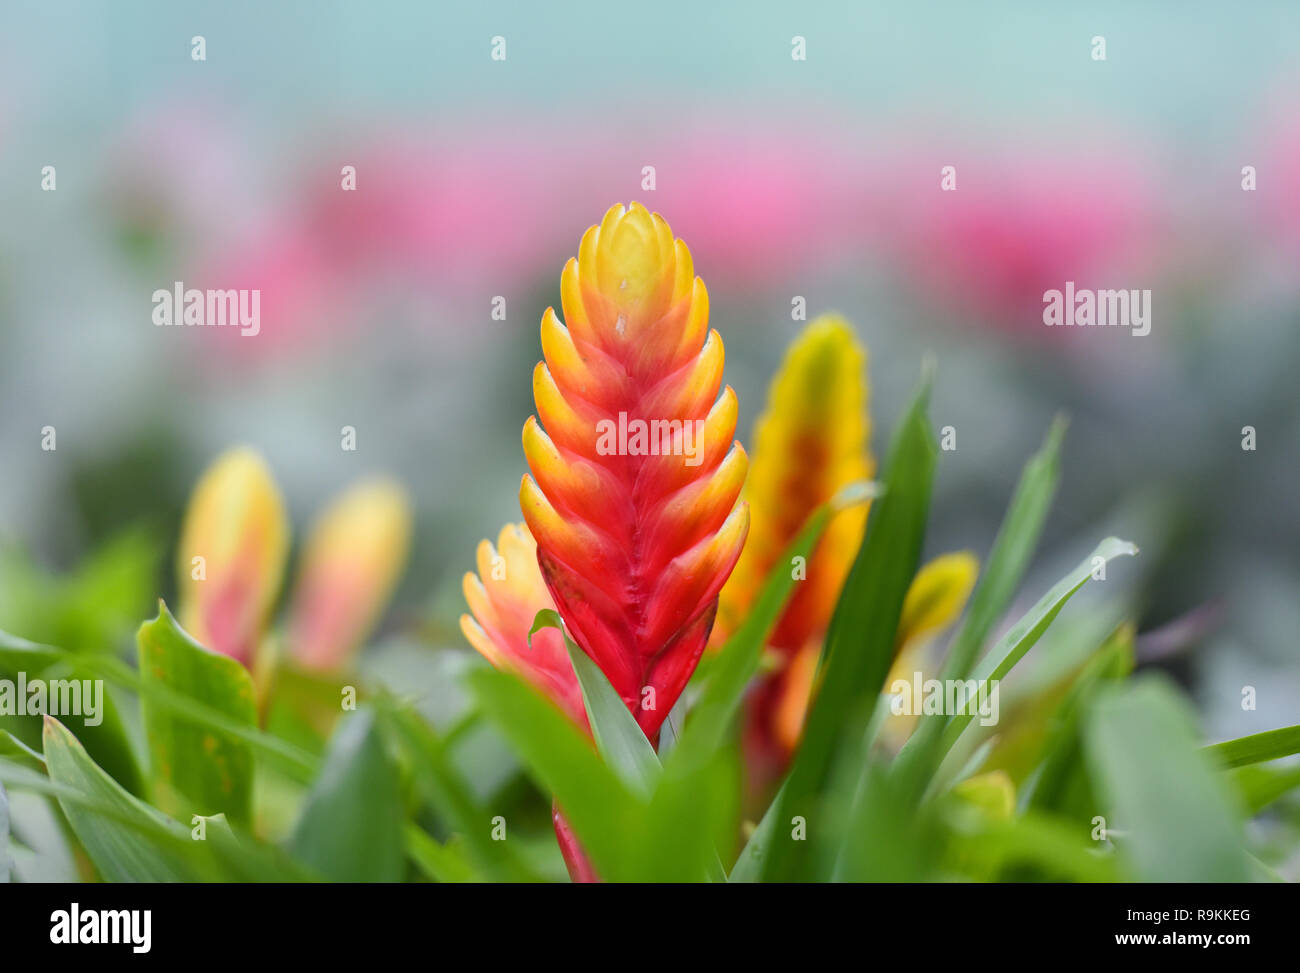 Bromeliad flower / Beautiful red and yellow bromeliad in garden nursery on pink plants background Stock Photo